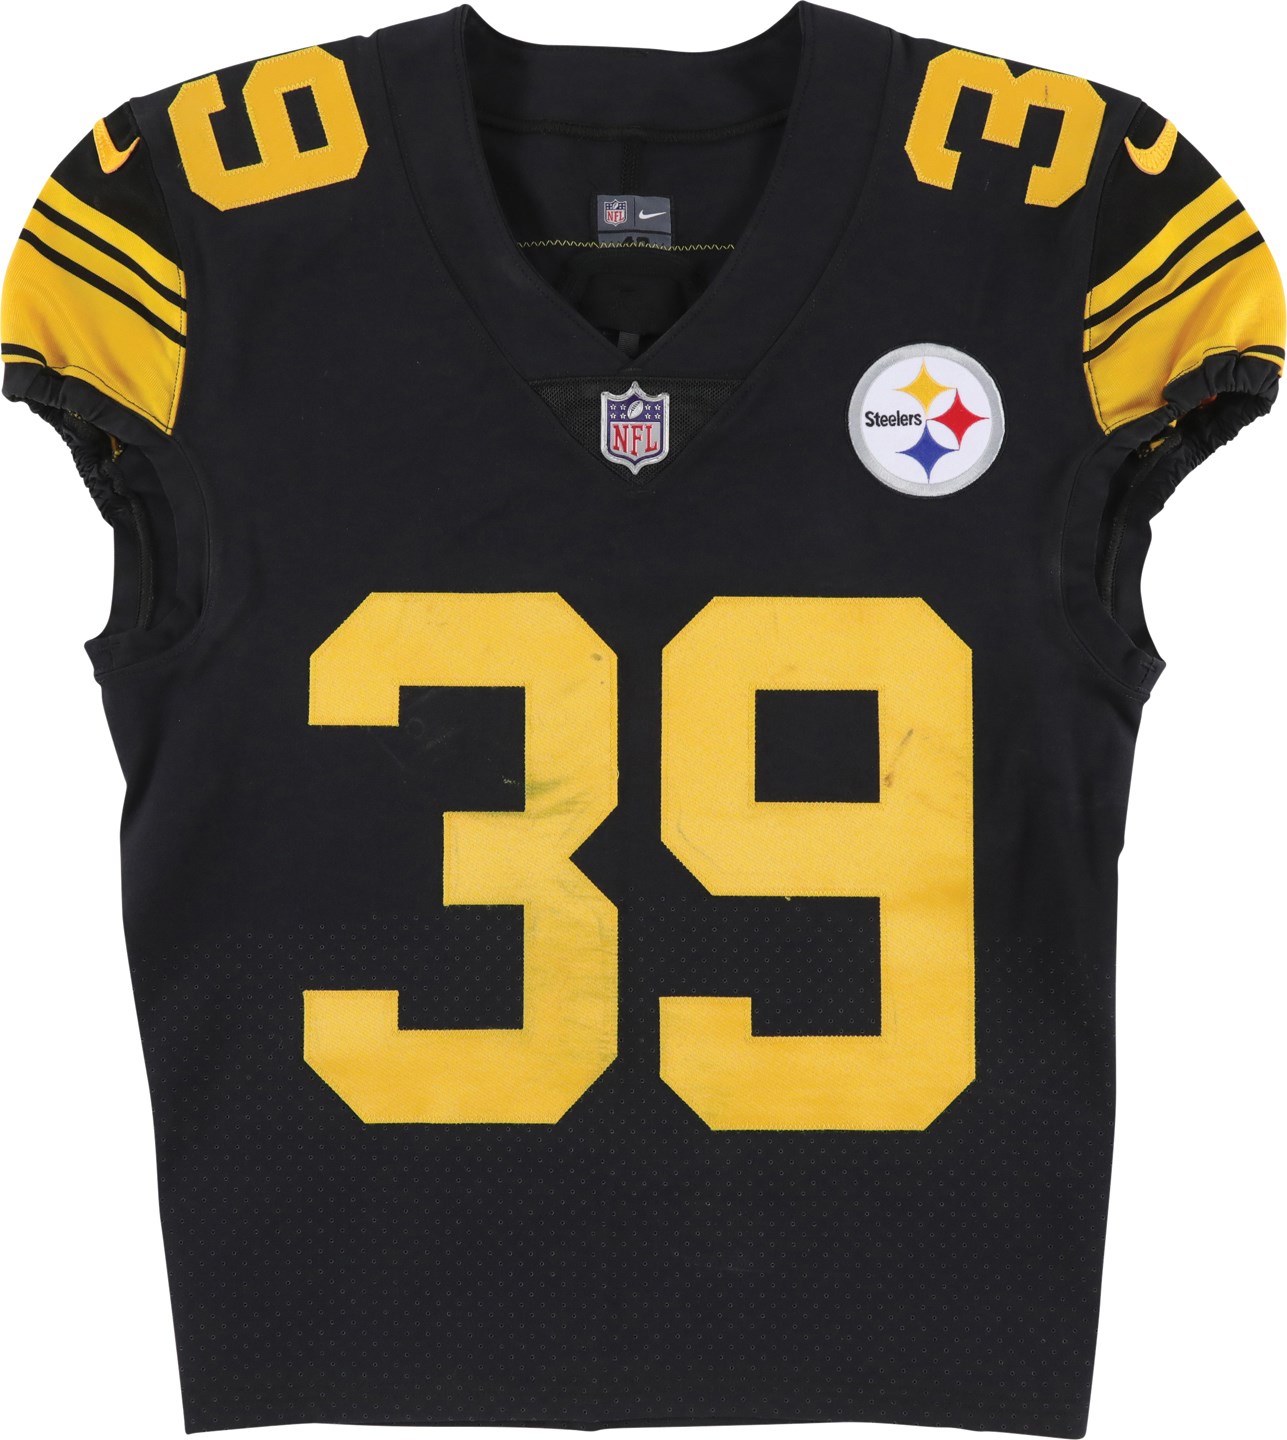 Football - 12/2/20 Minkah Fitzpatrick Pittsburgh Steelers "Color Rush" Game Worn Jersey (Photo-Matched)